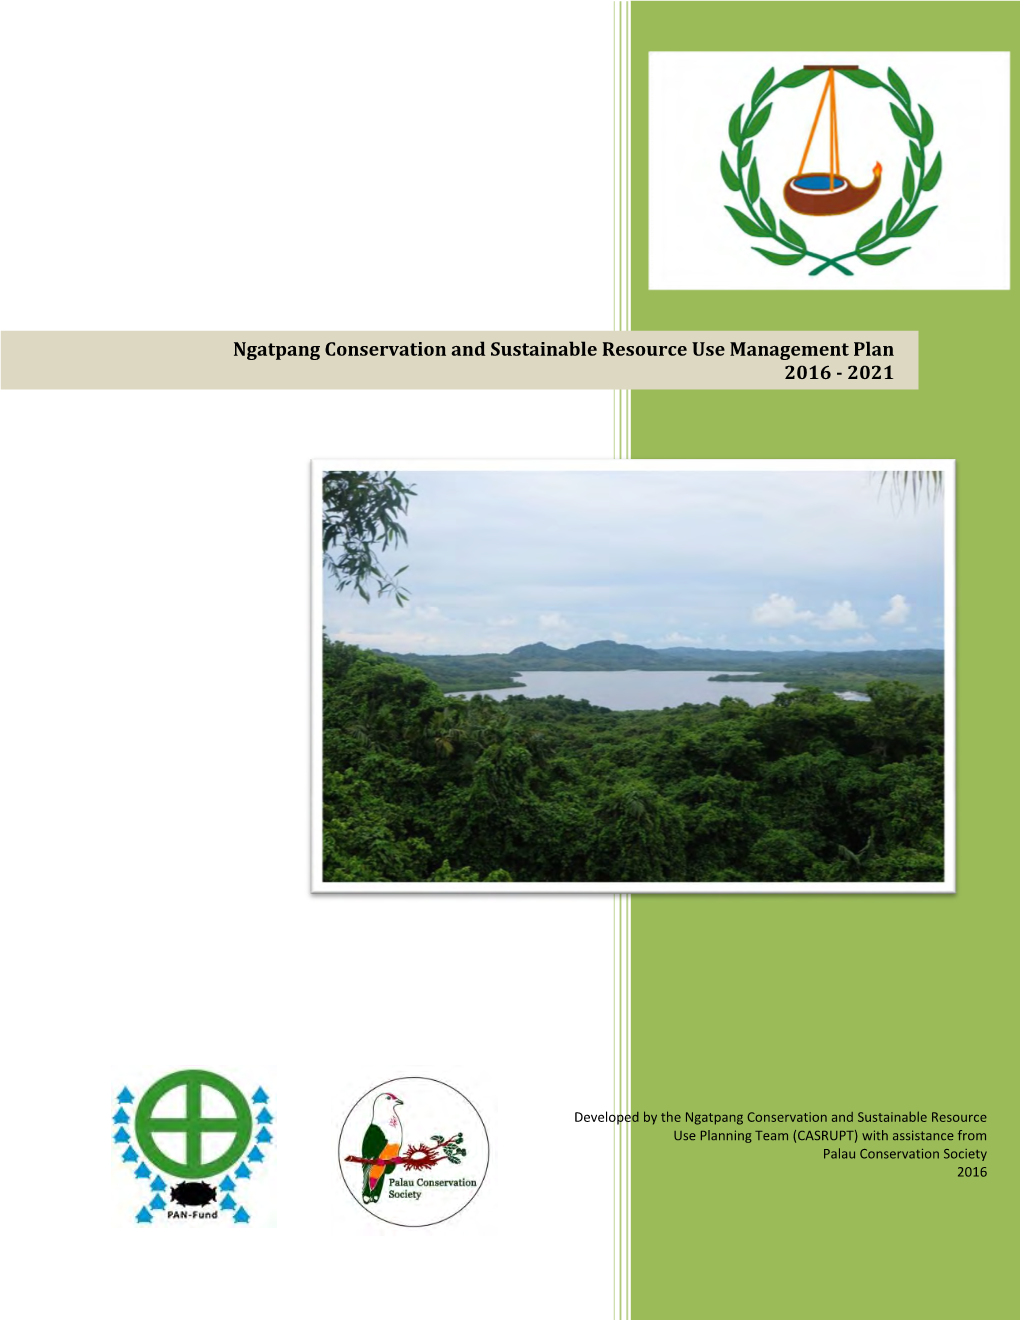 Ngatpang Conservation and Sustainable Resource Use Management Plan 2016 - 2021